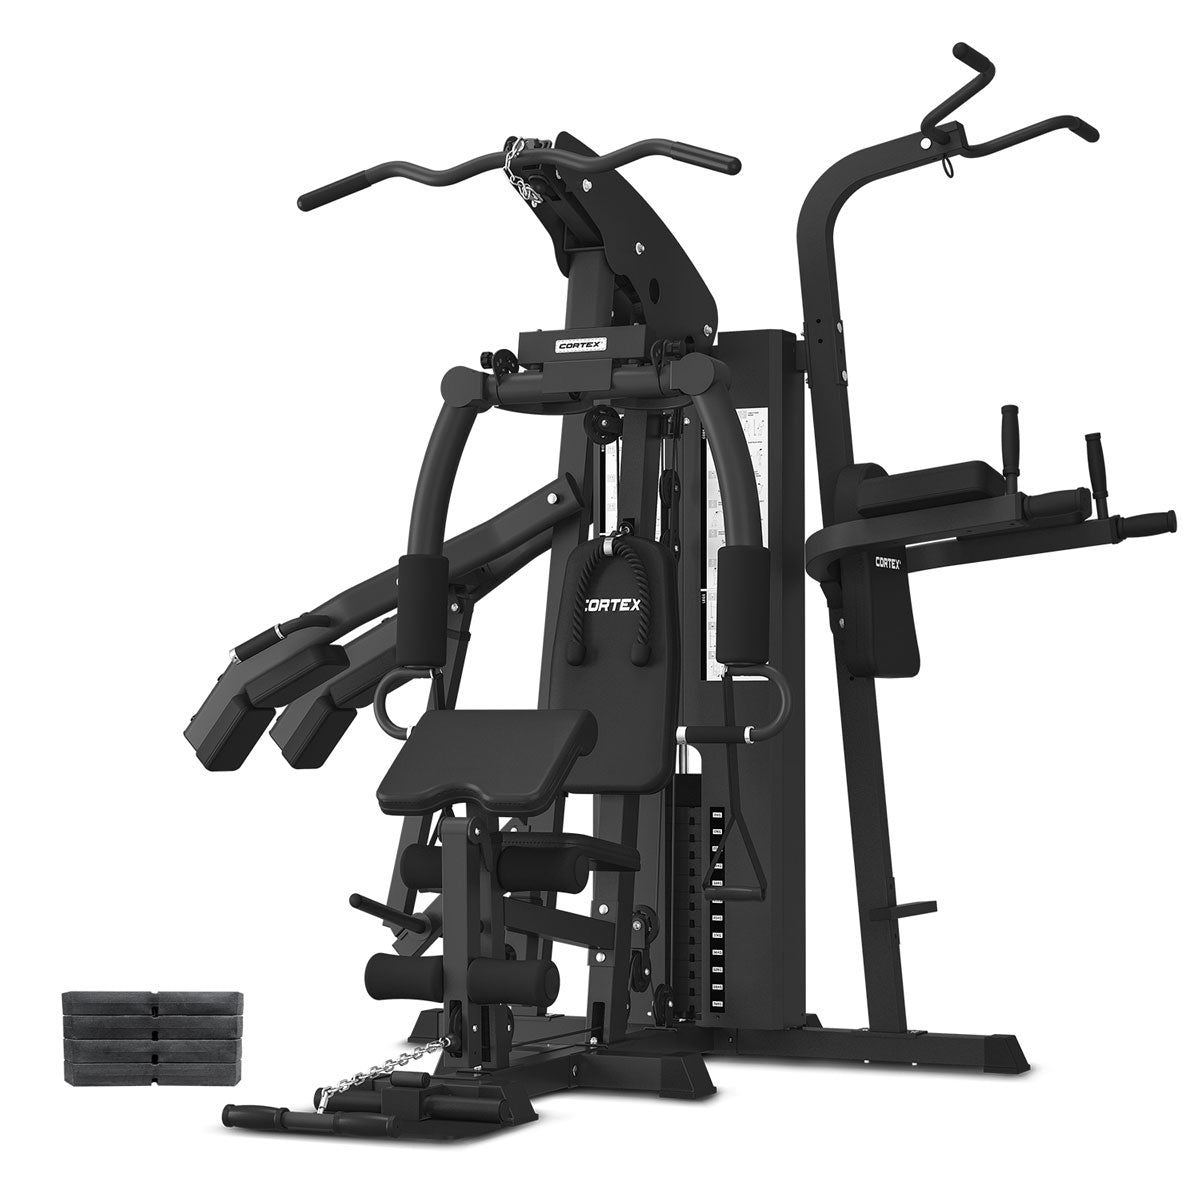 CORTEX GS7 Home Gym with Power Rack &amp; Squat Station + 98kg Weight Stack Package